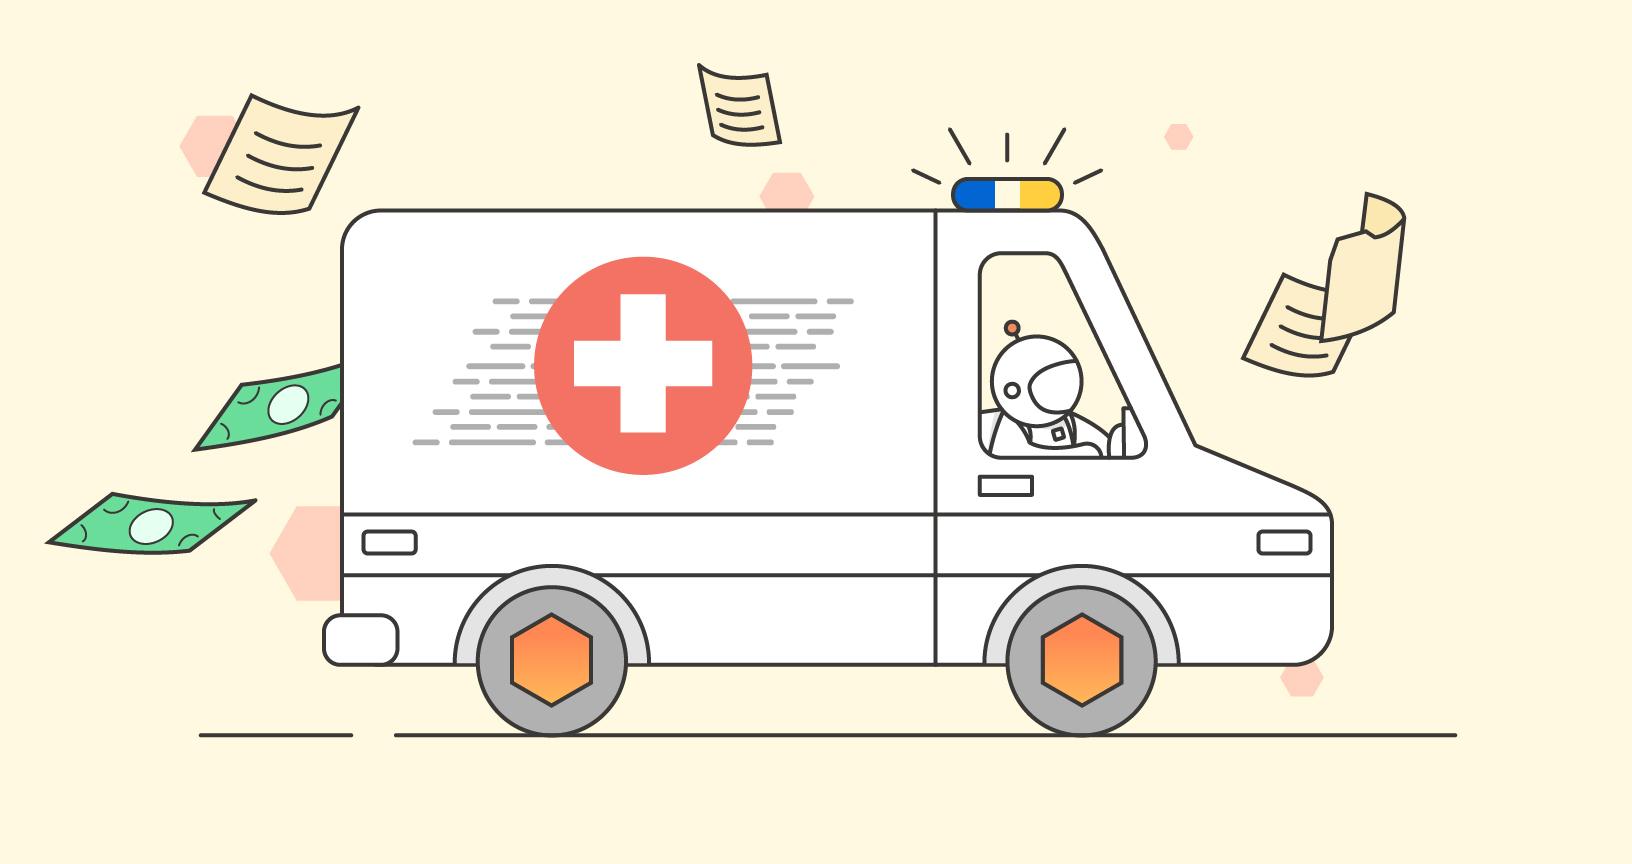 Postmanaut driving ambulance for the health of APIS. Illustration.